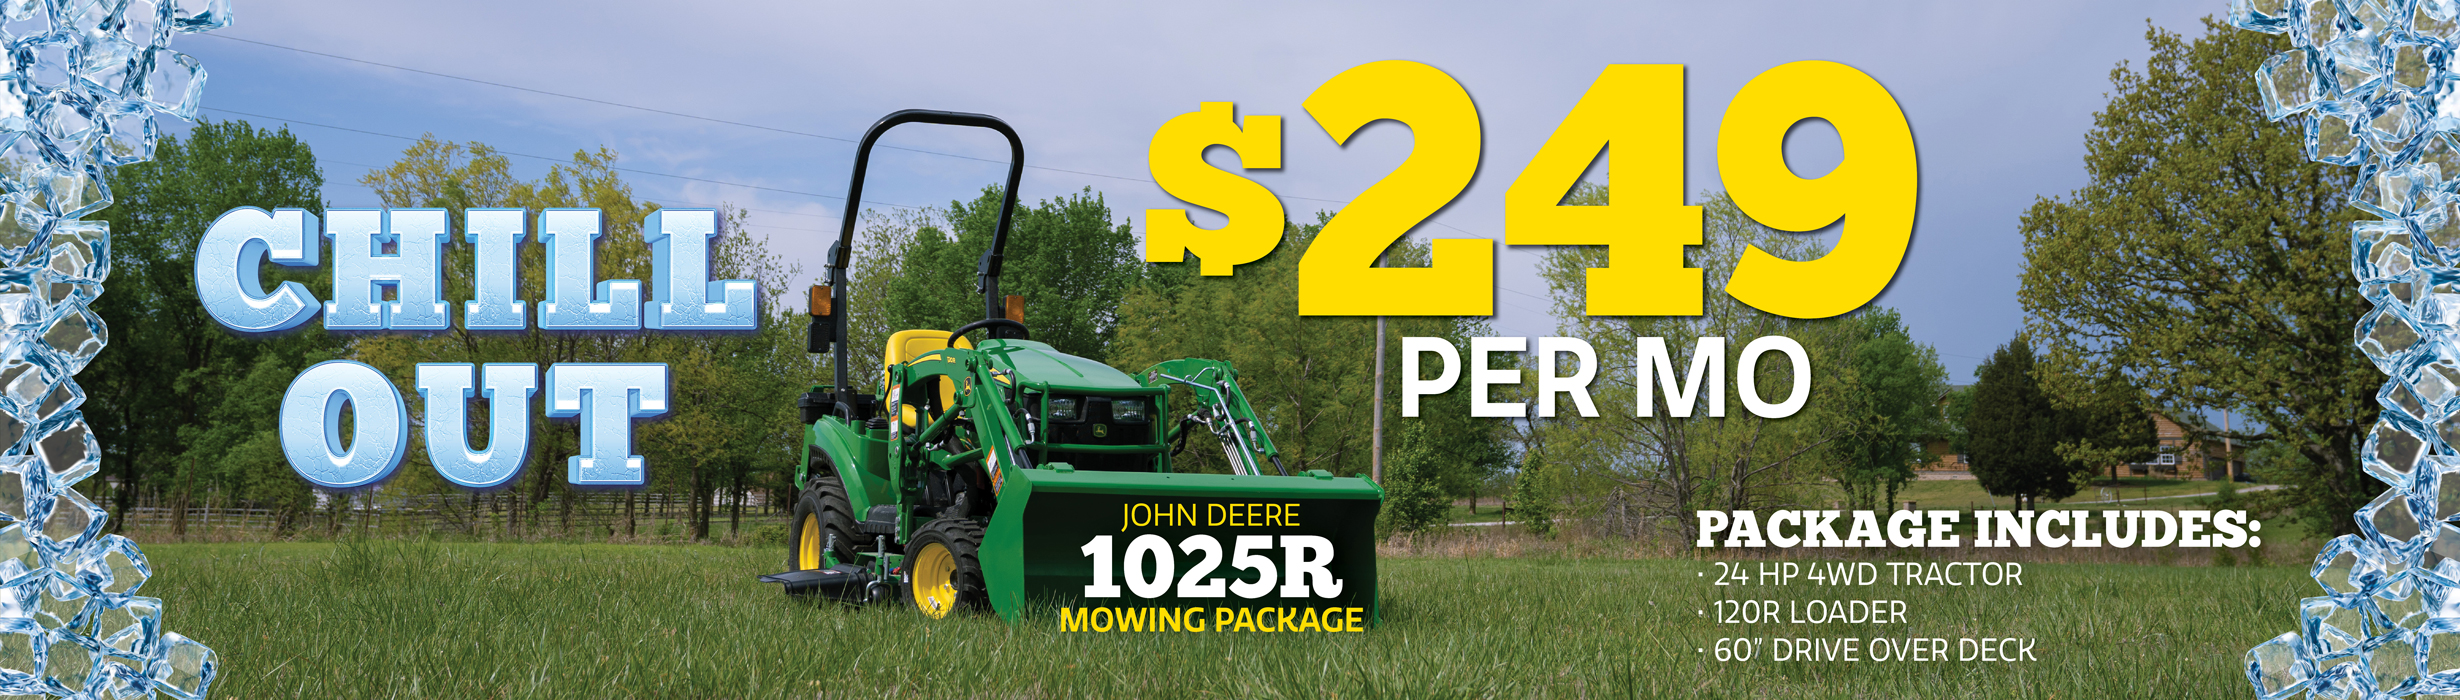 1025R Mowing Package for $249 per month